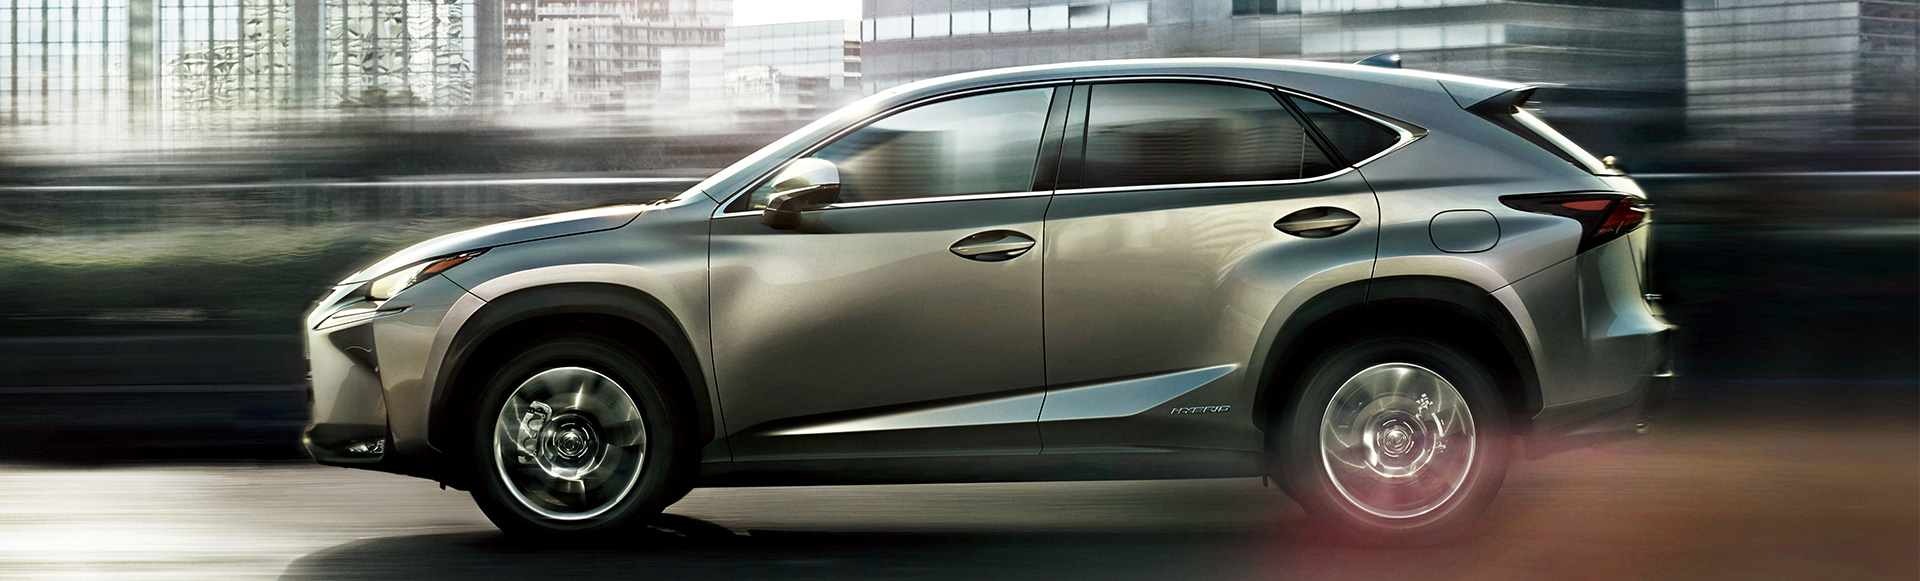 Lexus Launches All-new 'NX' Compact Crossover SUV in Japan